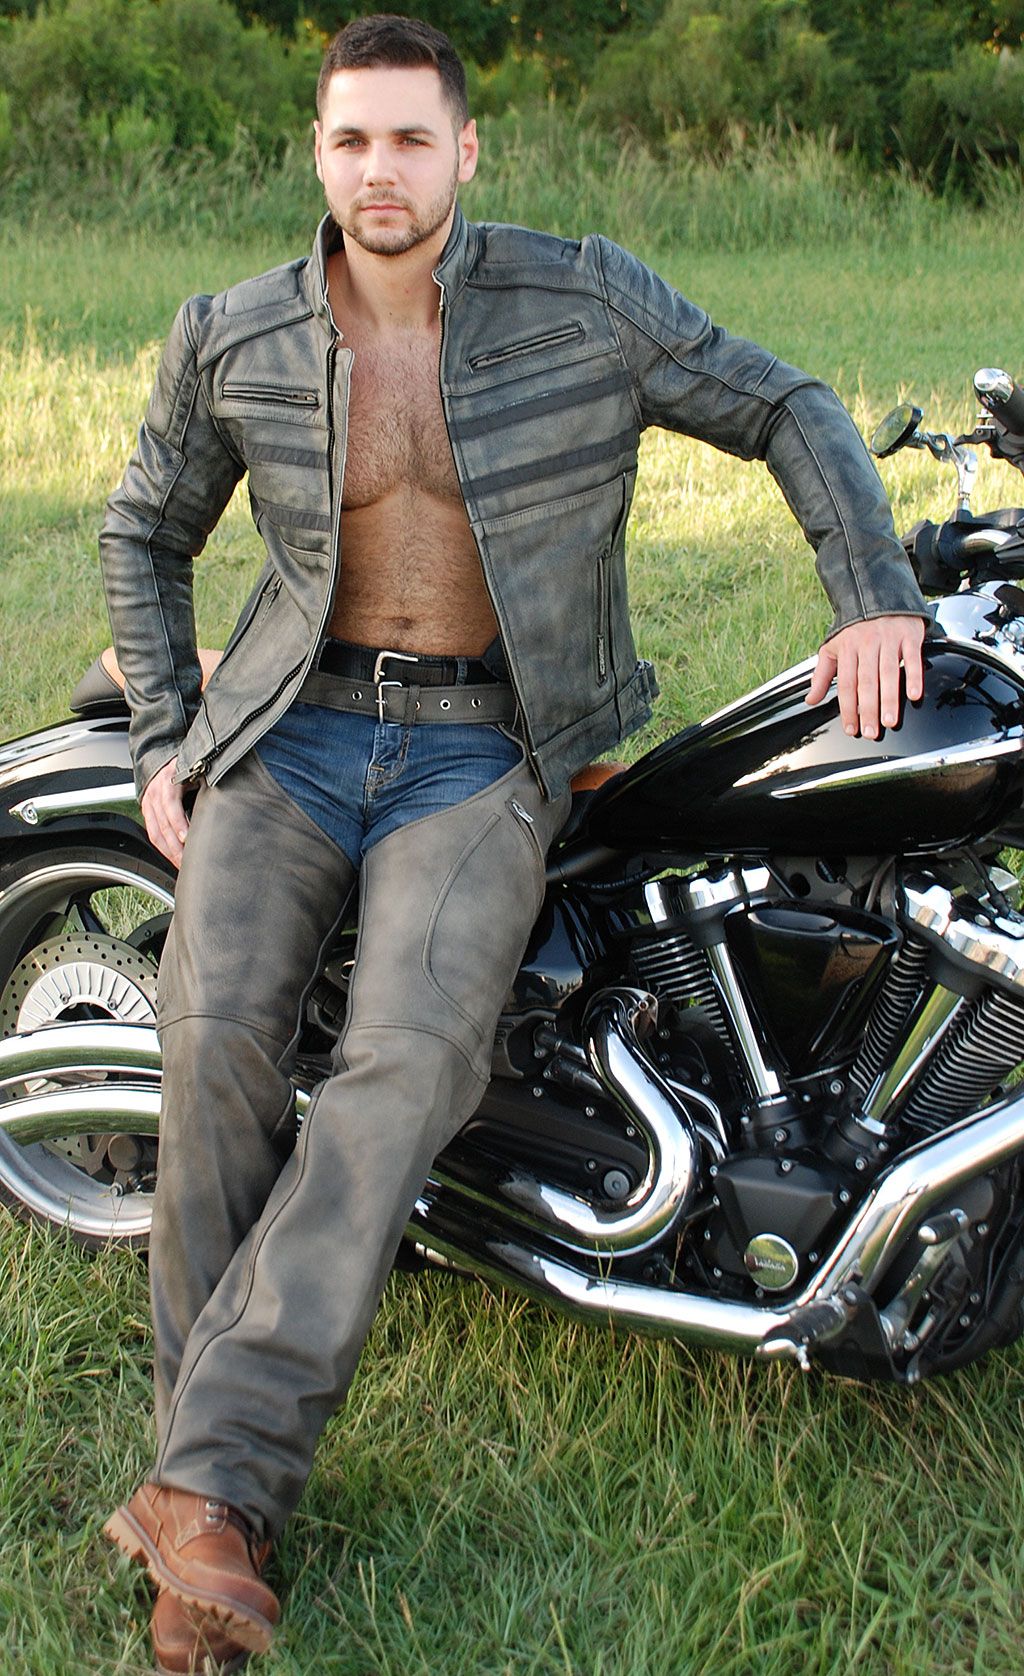 Biker wearing vintage grey leather chaps with motorcycle